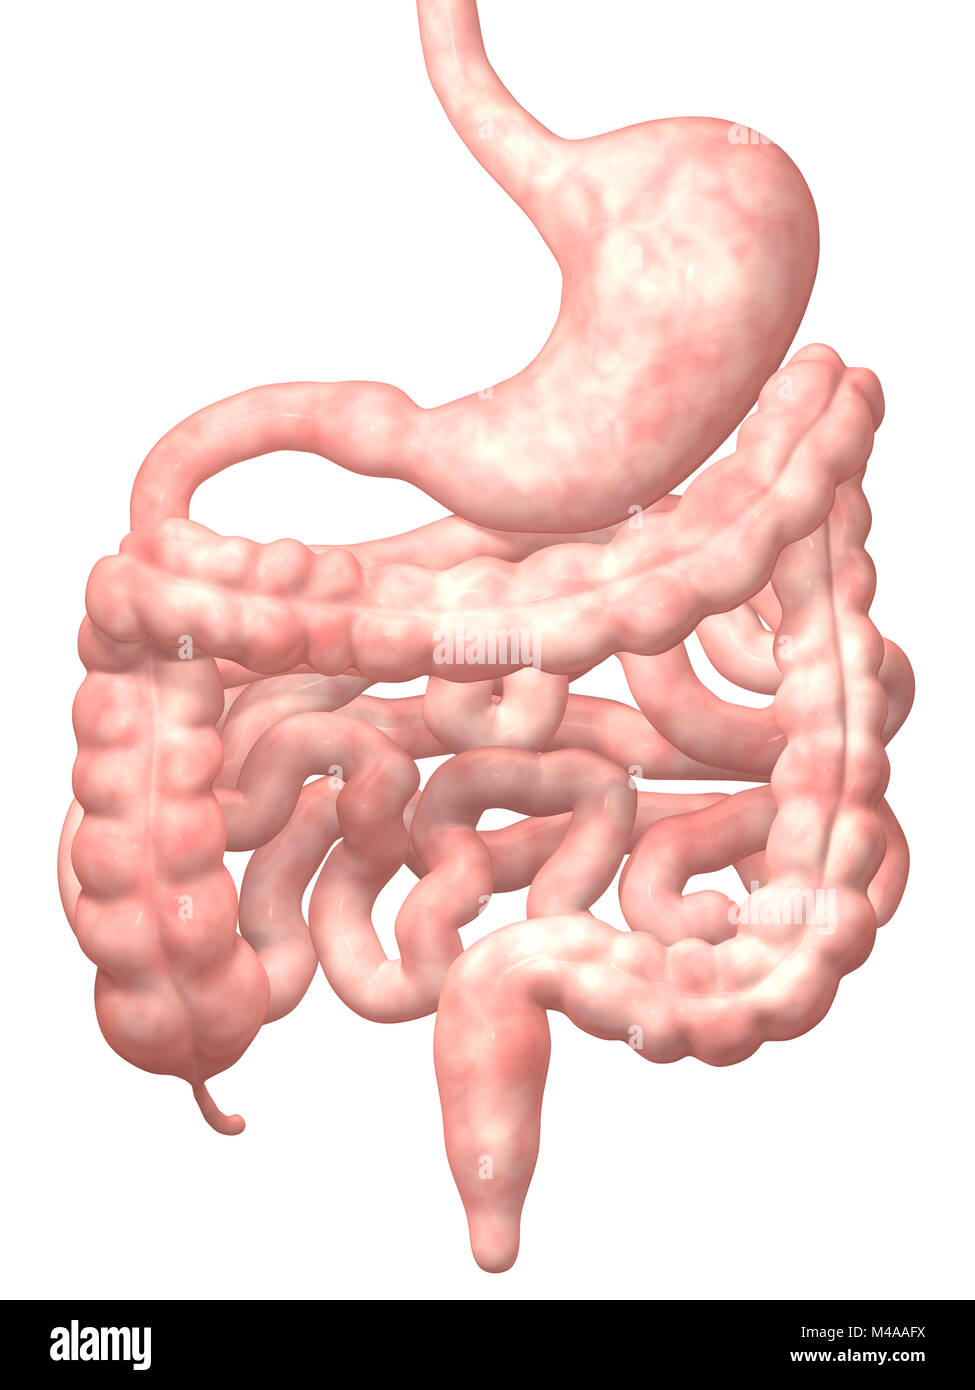 Human Digestive System isolated on White Background. Medical Concept Stock Photo